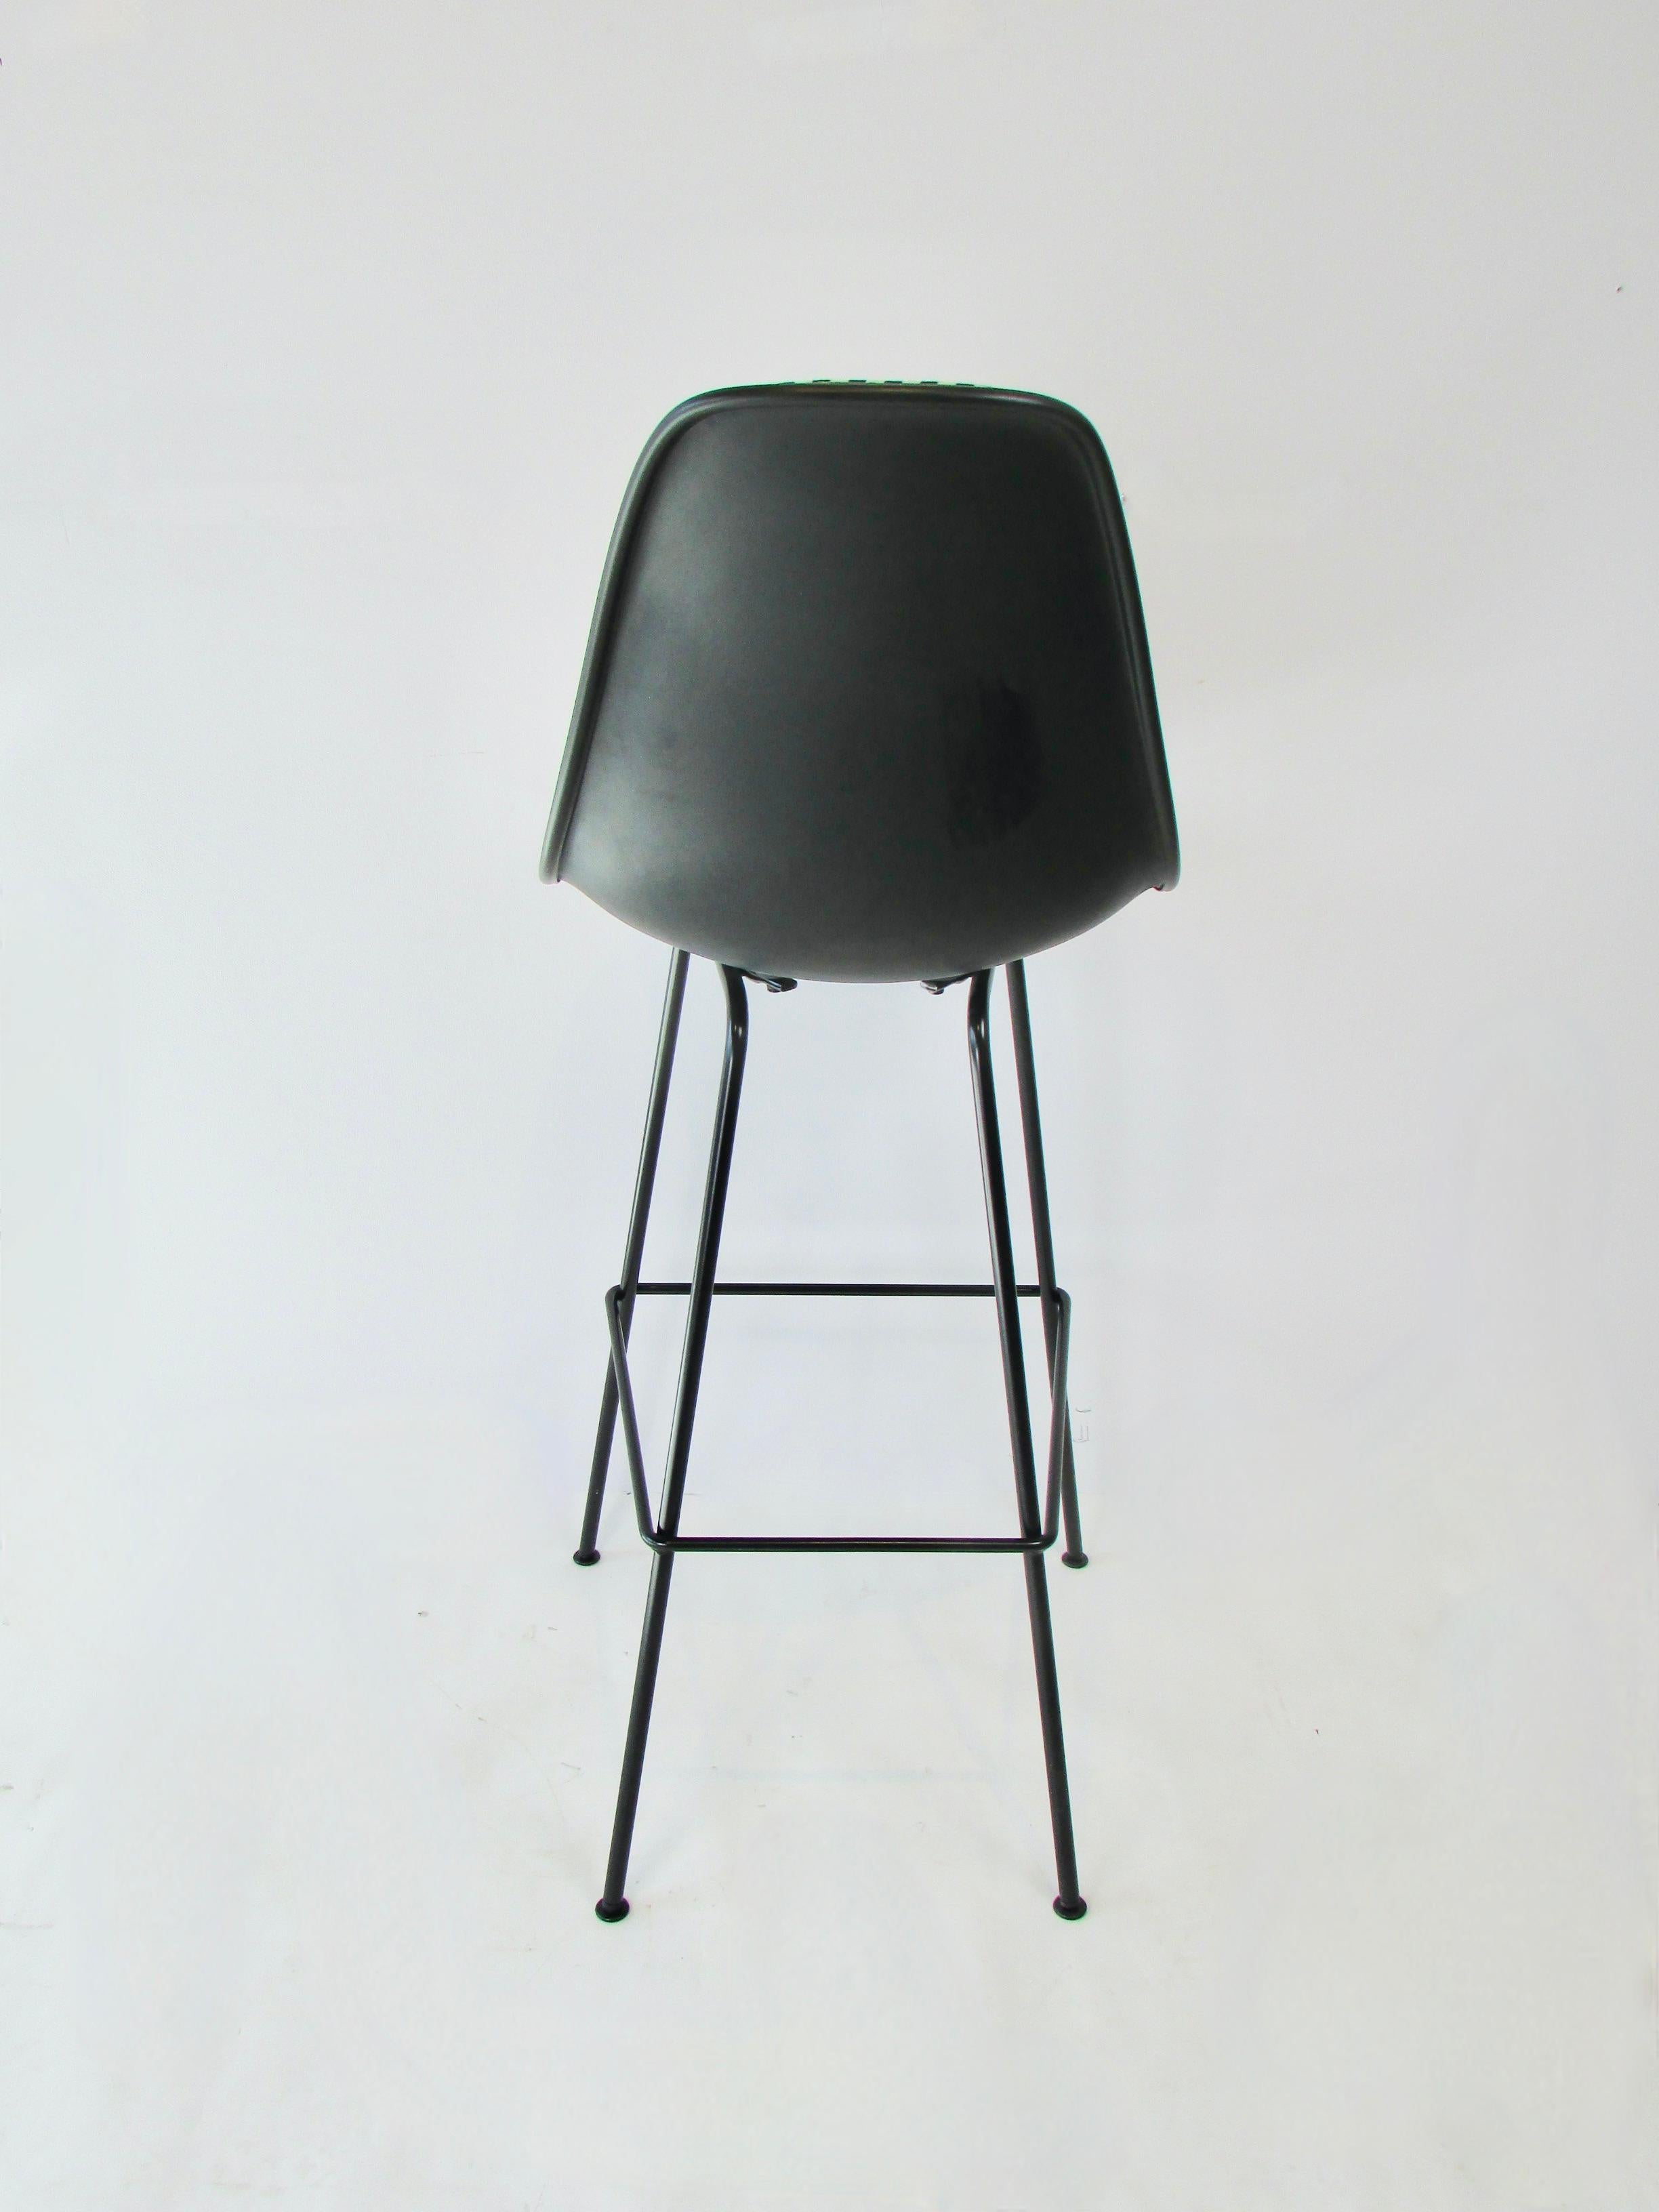 Lacquered Pair of Eames Herman Miller Bar Stools in Alexander Girard Black White Check For Sale